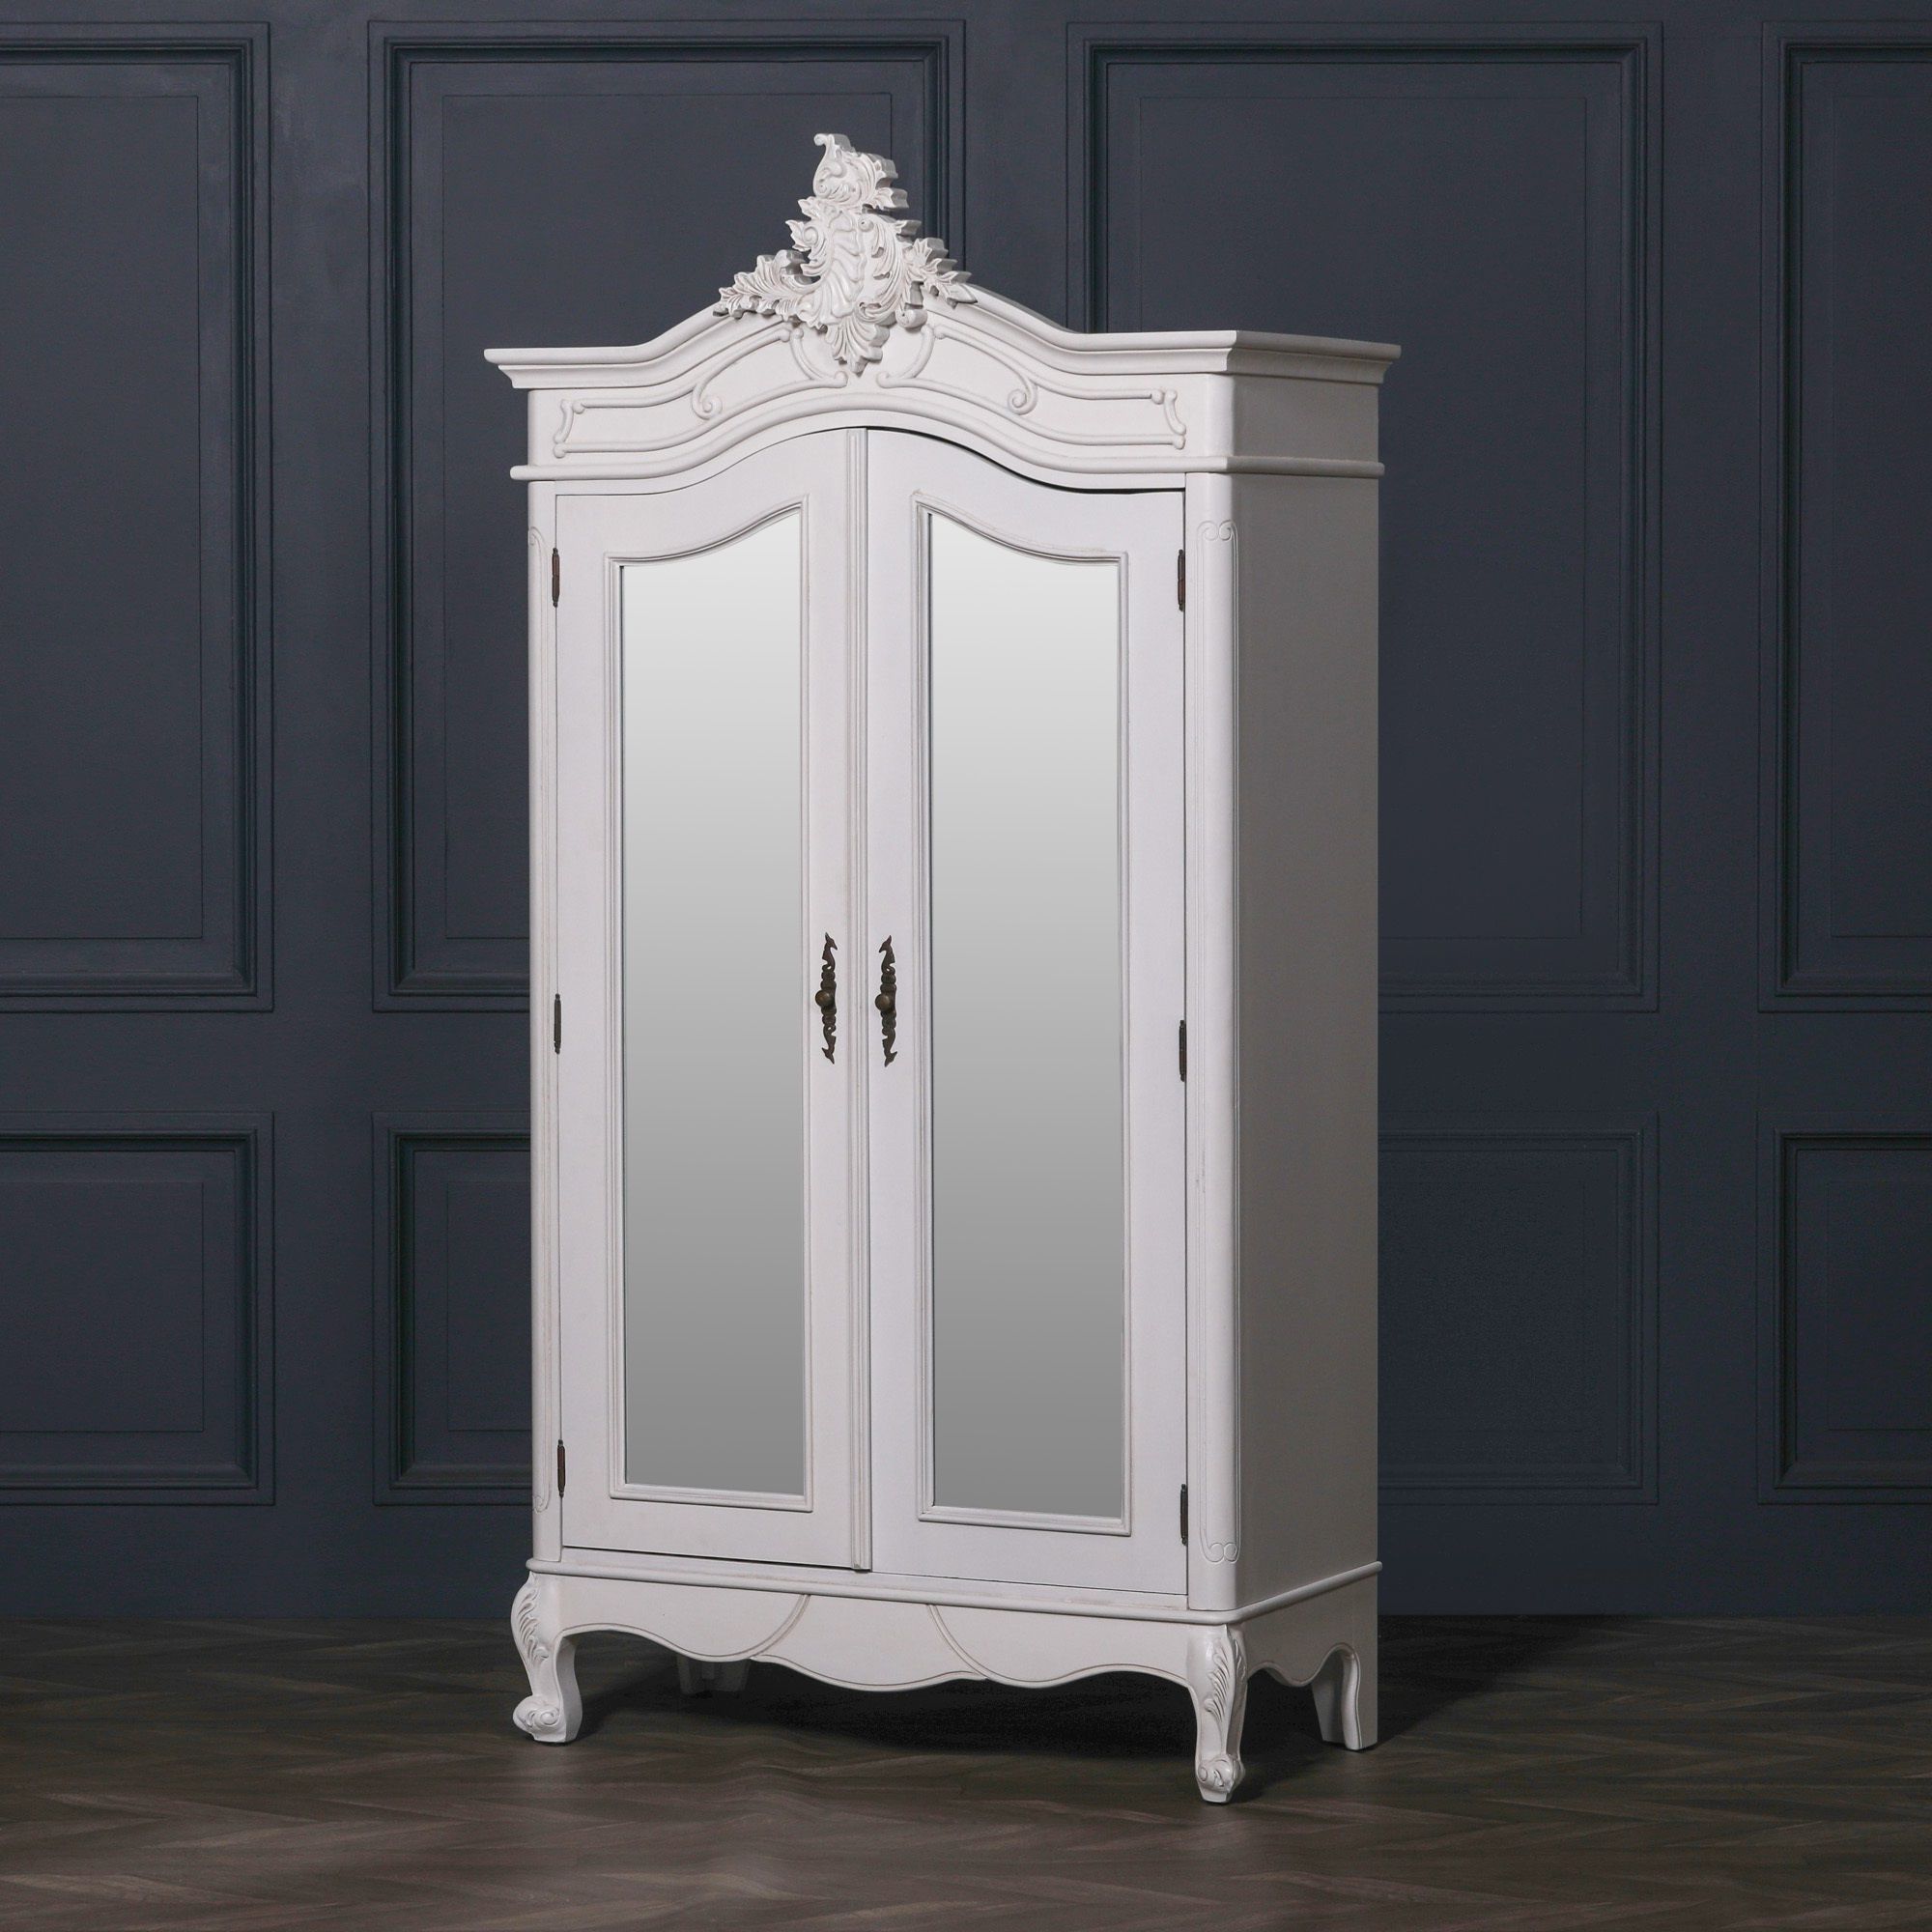 White Double Wardrobe Armoire French Style Mirror Doors Within French White Wardrobes (Gallery 10 of 20)